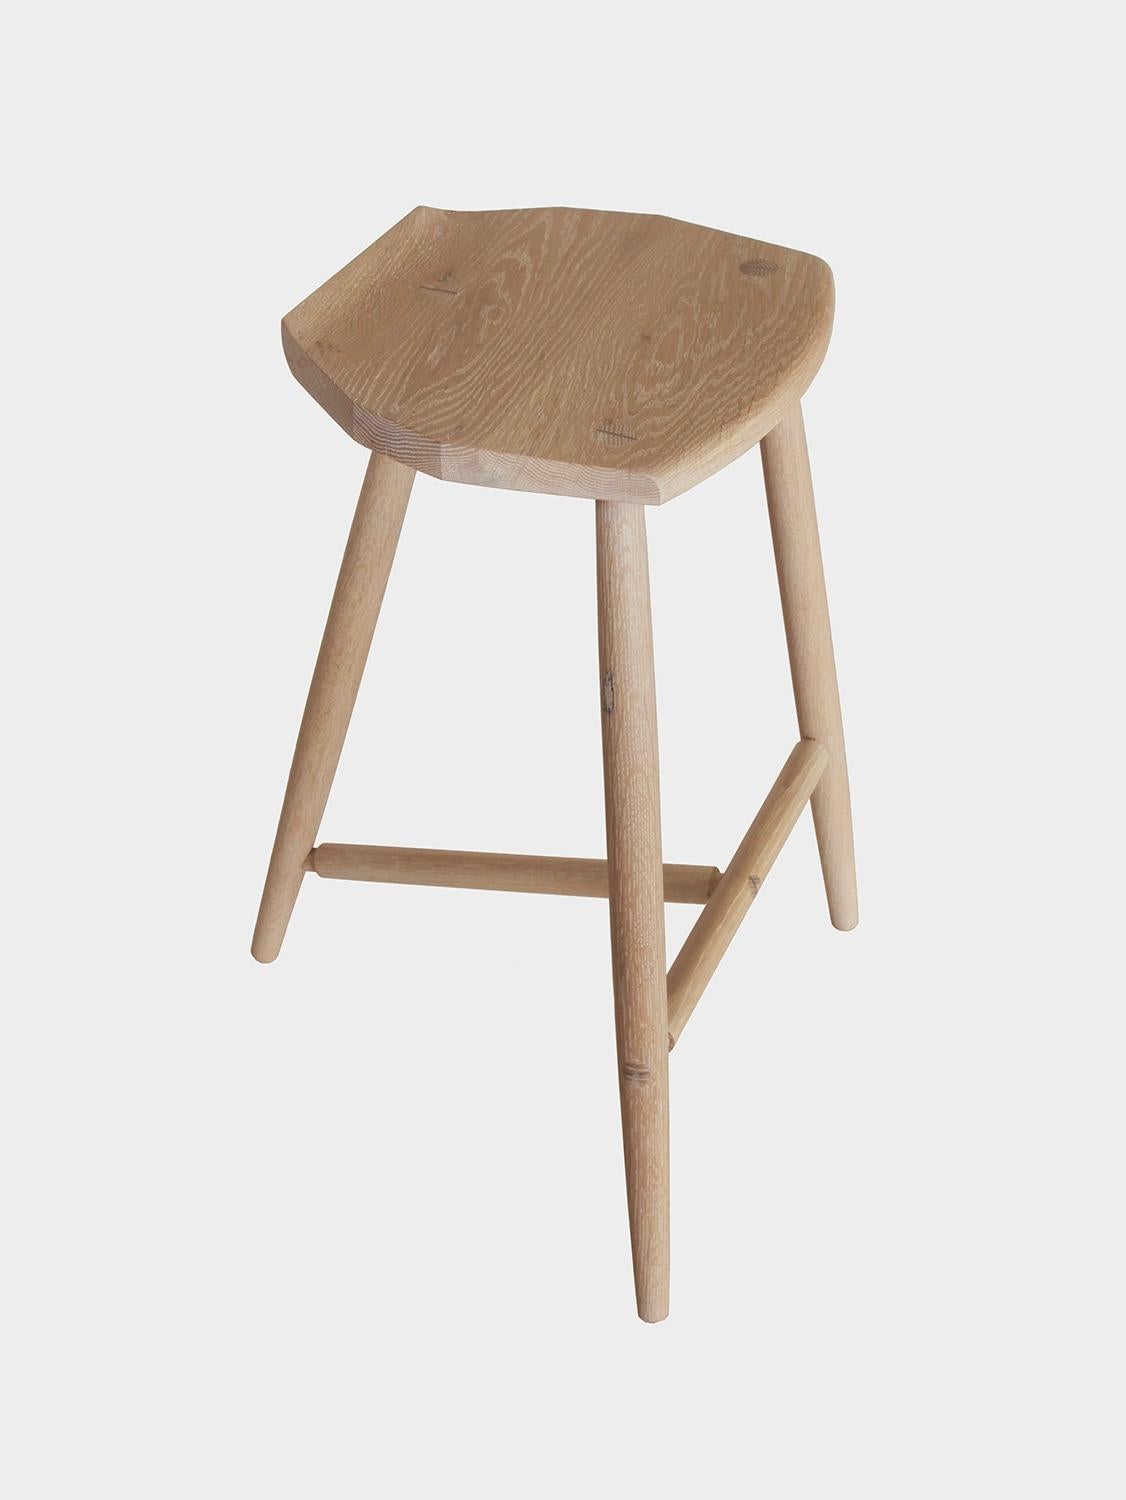 New York Heartwoods' cerused oak solid wood counter height Jordan stool is influenced by Shaker and Mid-Century design; created to be comfortable, lightweight and easy to move; and features three turned legs, a unique hand-carved faceted seat, and